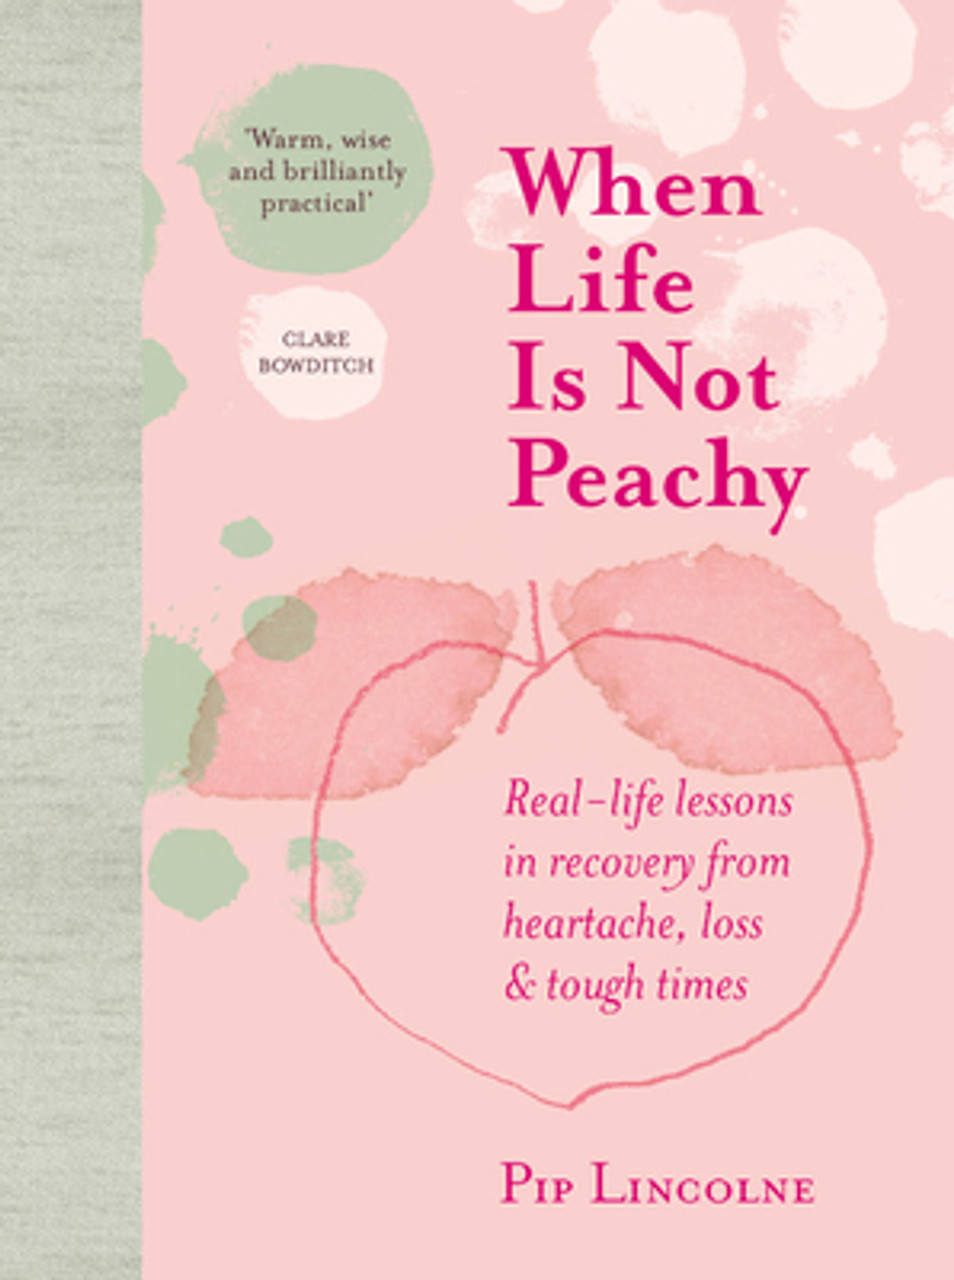 Pip Lincolne / When Life is Not Peachy: Real-life lessons in recovery from heartache, grief and tough times (Hardback)